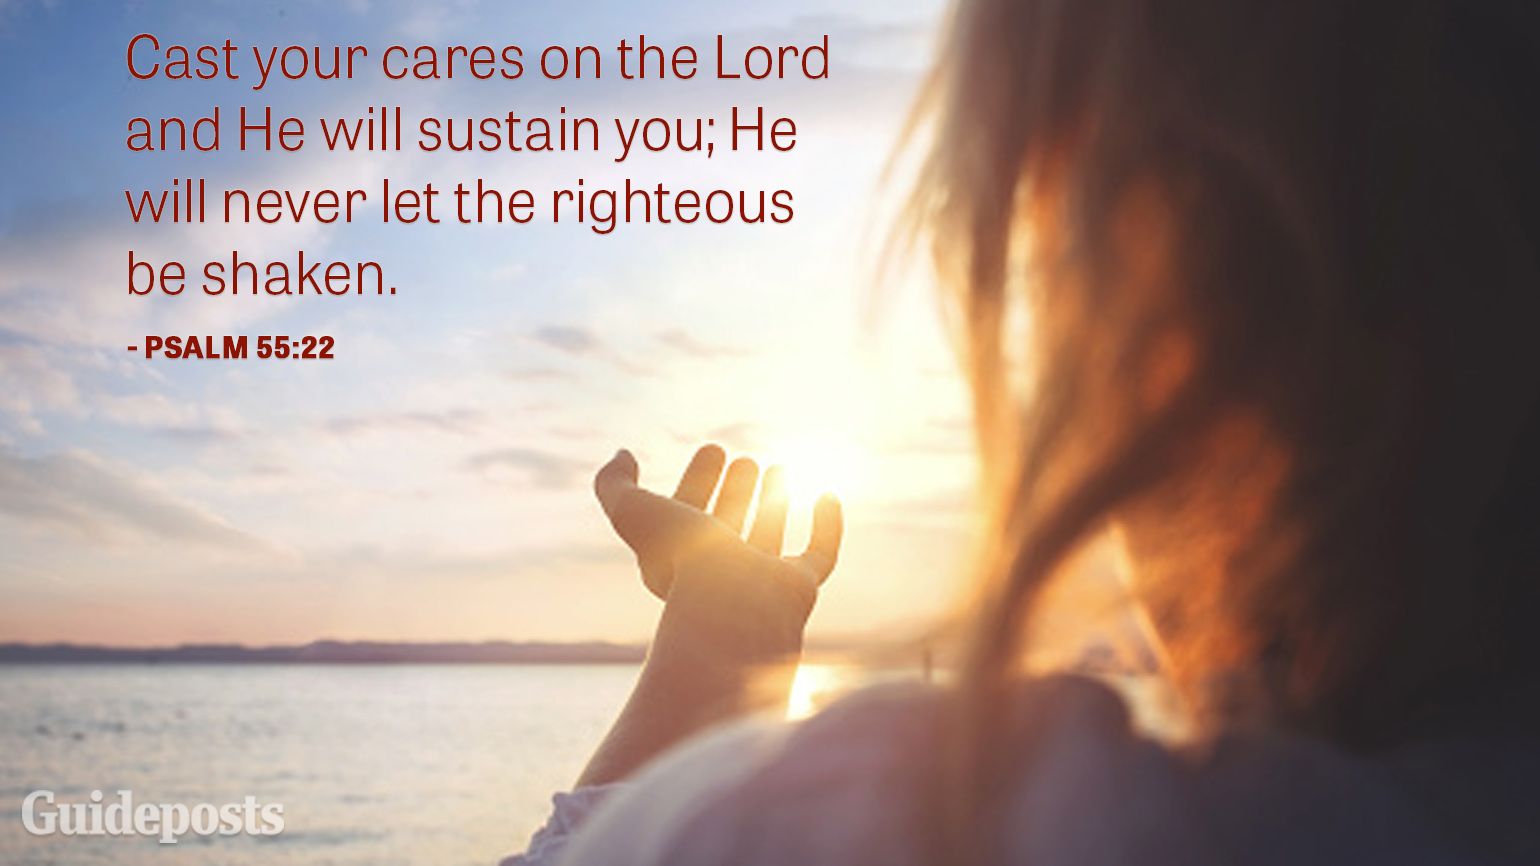 Cast your cares on the Lord and He will sustain you; He will never let the righteousness be shaken.